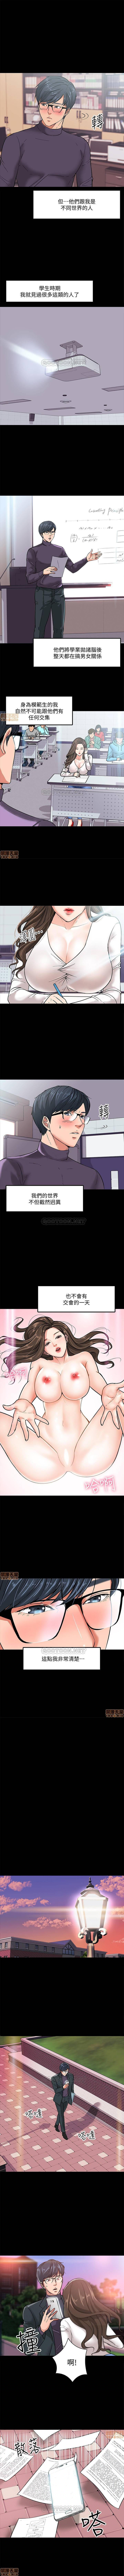 Transexual PROFESSOR, ARE YOU JUST GOING TO LOOK AT ME? | DESIRE SWAMP | 教授，你還等什麼? Ch. 2 [Chinese] Manhwa Licking - Page 6